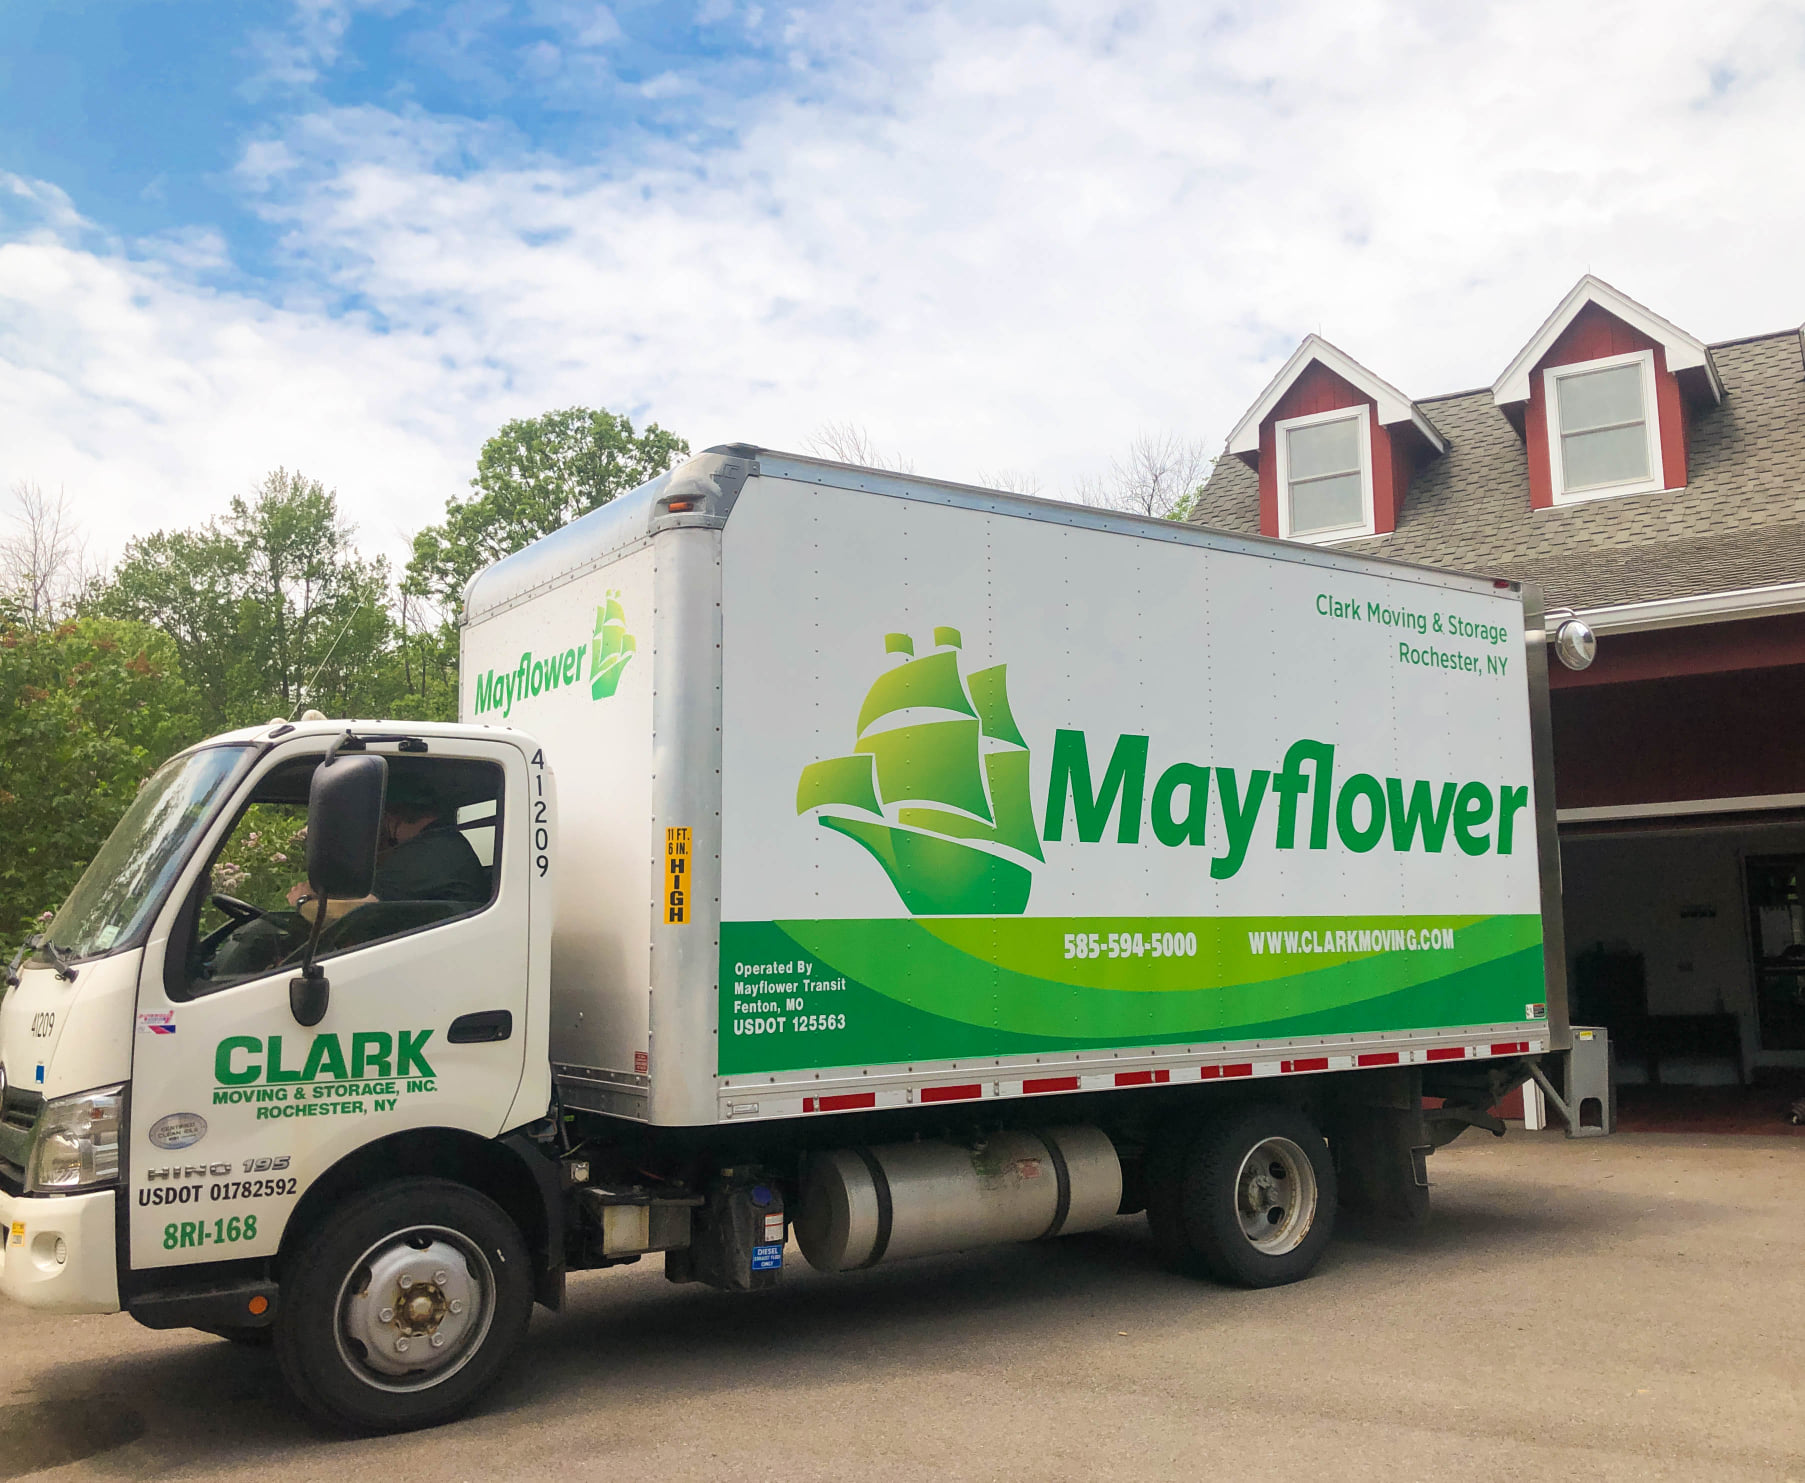 Clark Moving & Storage Best Moving Company in Rochester